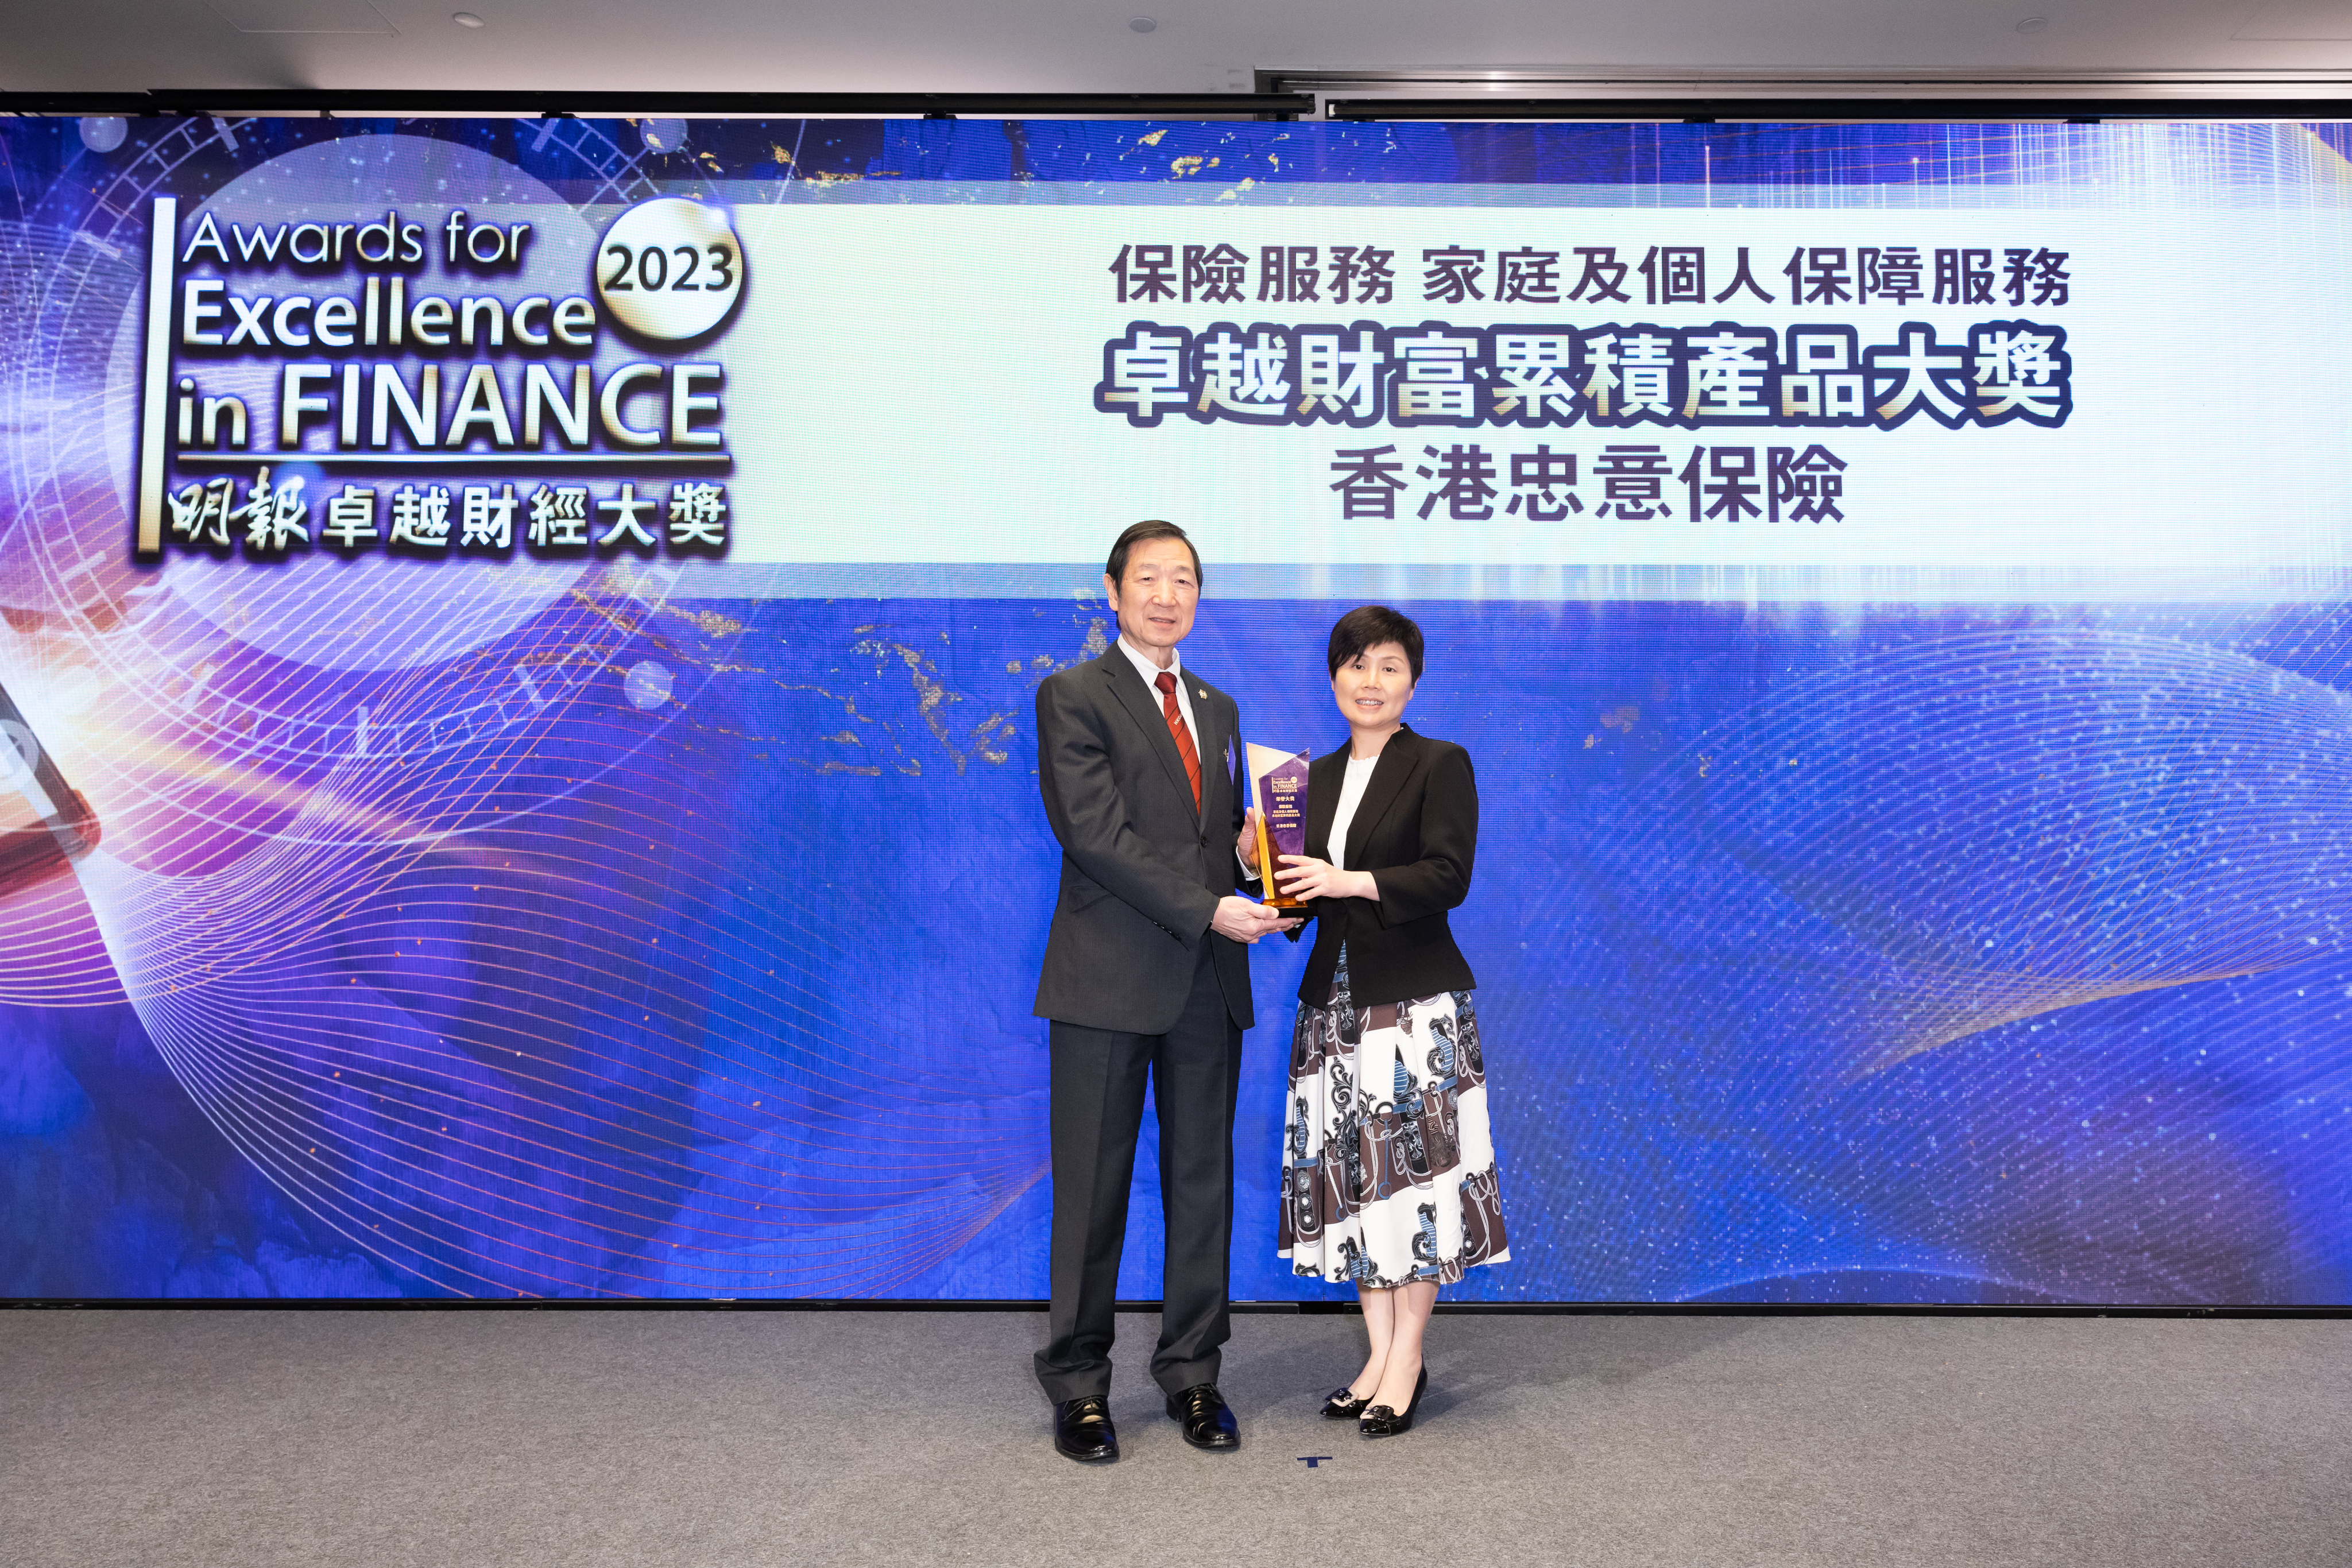 Ms. Quinney Tang, Division head, Product Development of Generali Hong Kong received the “Award for Excellence in Wealth Accumulation Product” on behalf of the Company.